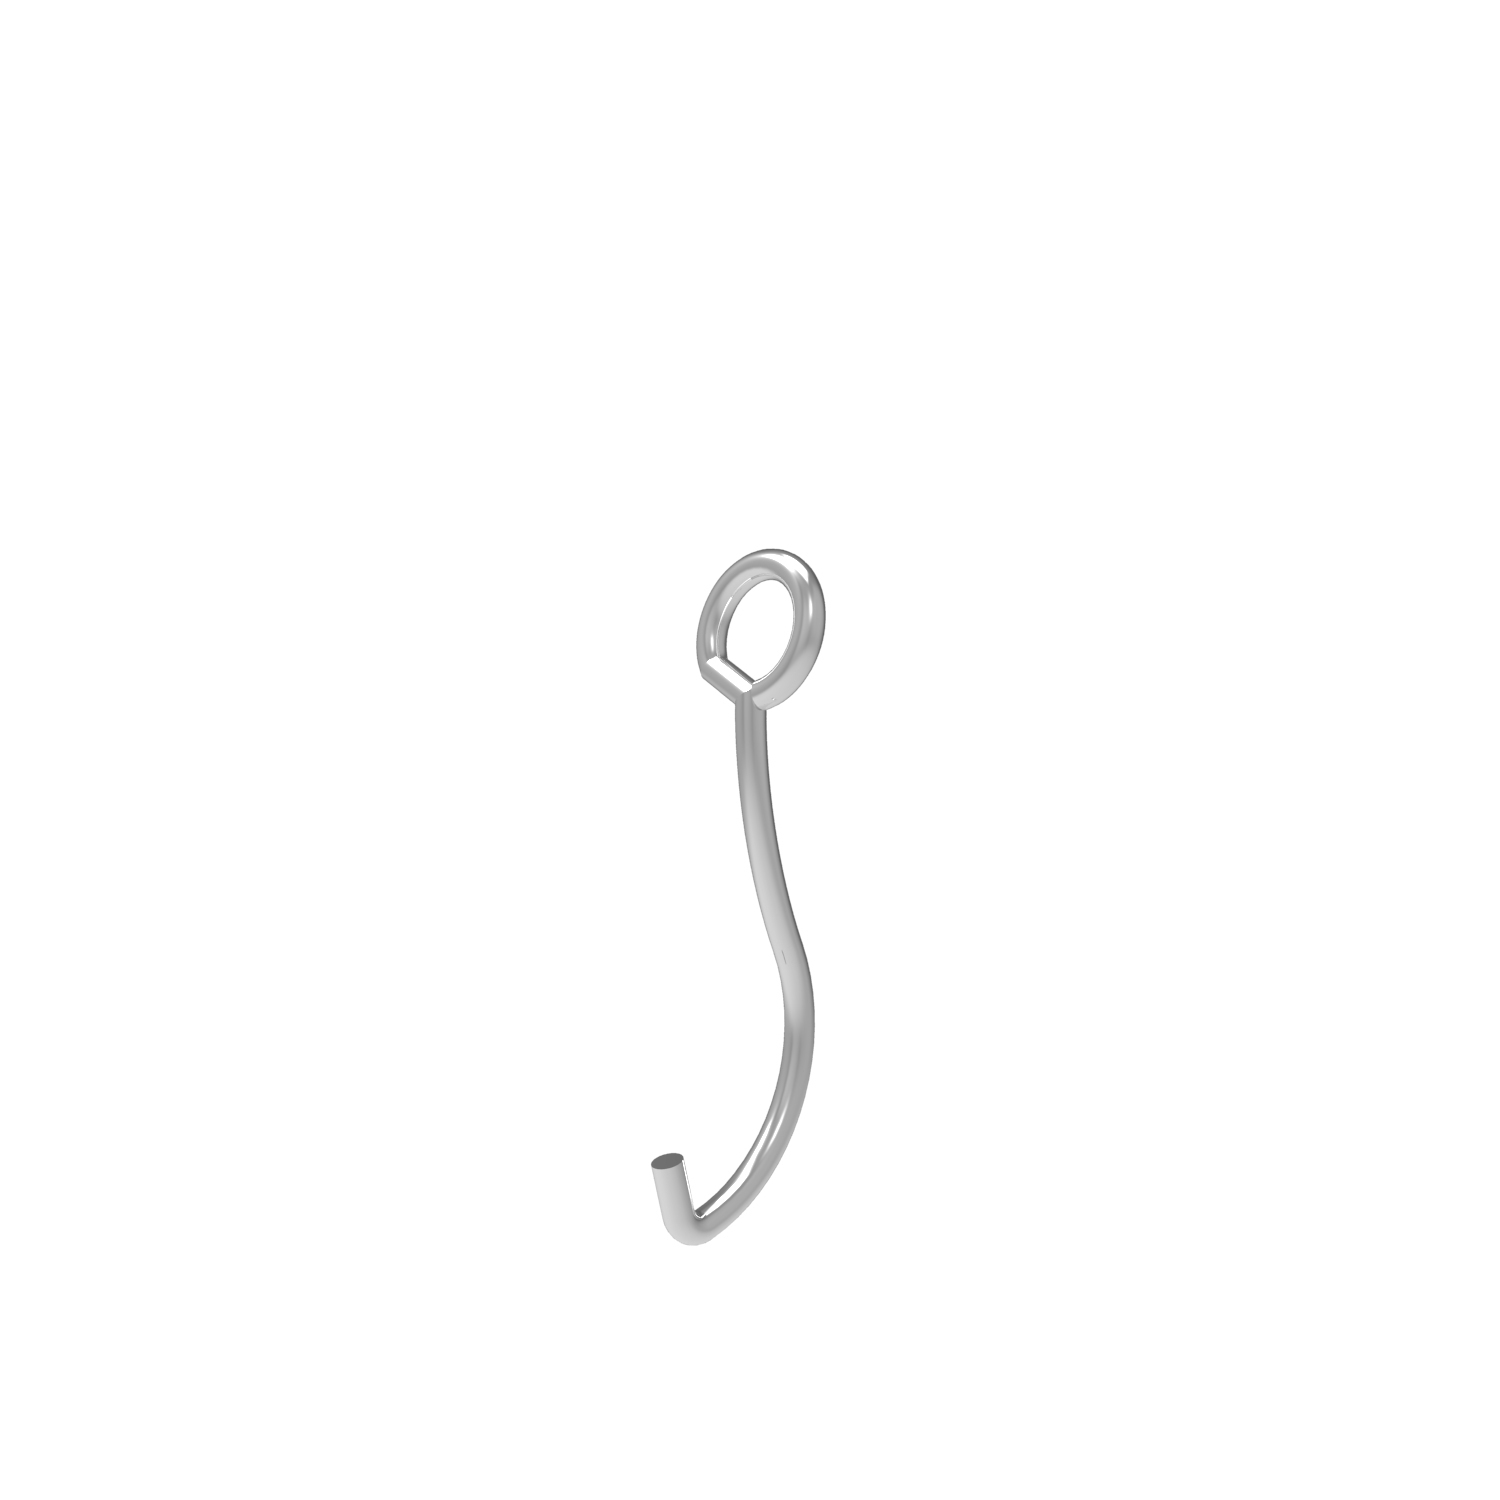 Retractor NAKAMURA Fish-Hook Type Small One Pair, Surgical instruments